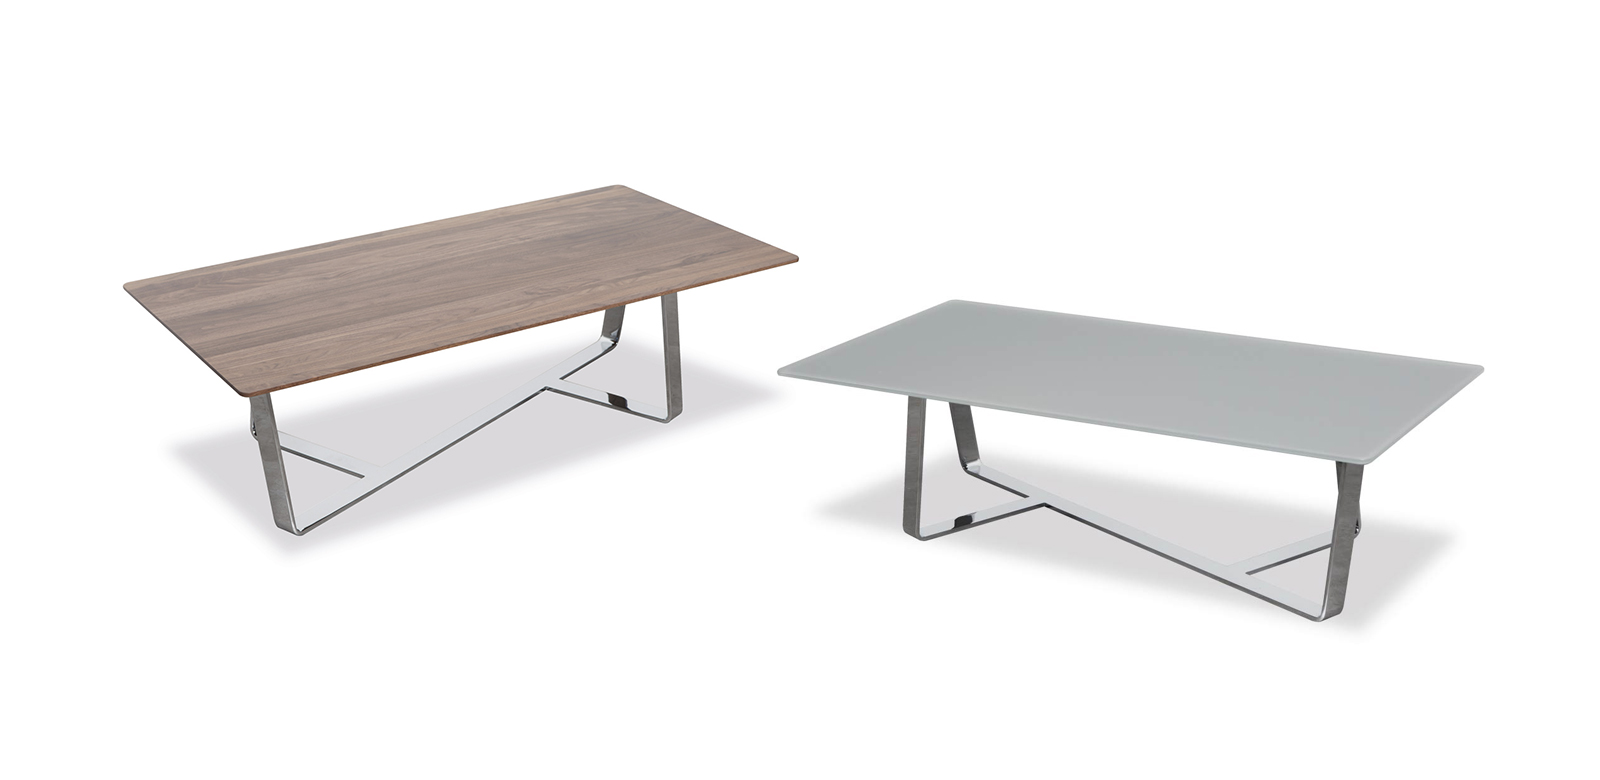 Exclusive design tables from Erpo